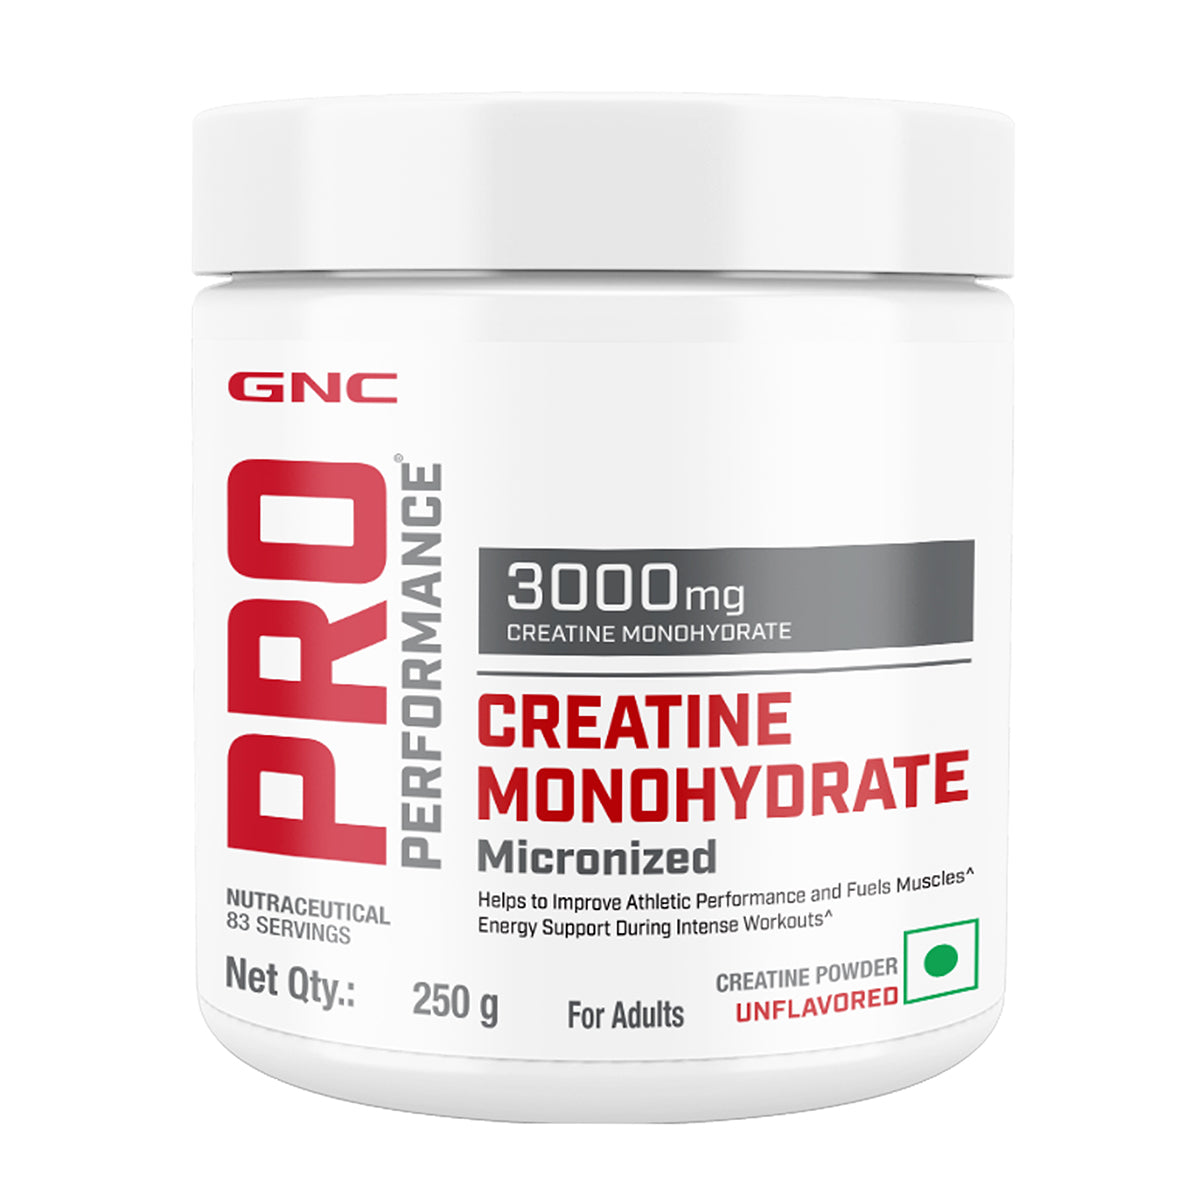 GNC Pro Performance Creatine Monohydrate - Powerful Muscle Pump for Intense Workout